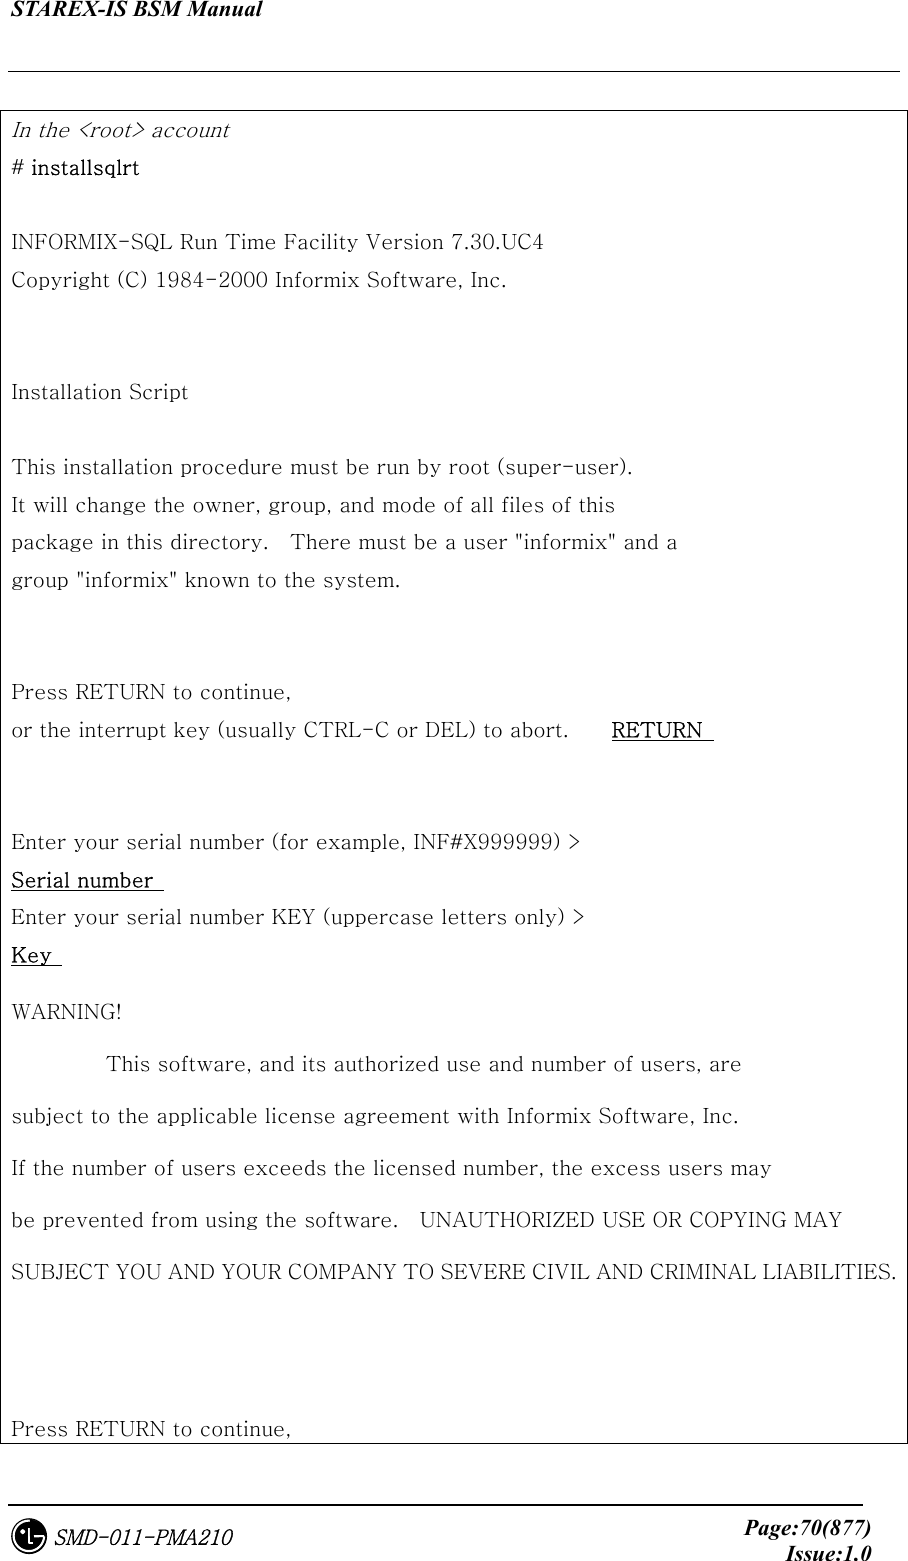 STAREX-IS BSM Manual     Page:70(877)Issue:1.0SMD-011-PMA210  In the &lt;root&gt; account   # installsqlrt  INFORMIX-SQL Run Time Facility Version 7.30.UC4 Copyright (C) 1984-2000 Informix Software, Inc.   Installation Script  This installation procedure must be run by root (super-user). It will change the owner, group, and mode of all files of this package in this directory.    There must be a user &quot;informix&quot; and a   group &quot;informix&quot; known to the system.   Press RETURN to continue, or the interrupt key (usually CTRL-C or DEL) to abort.    RETURN     Enter your serial number (for example, INF#X999999) &gt;   Serial number  Enter your serial number KEY (uppercase letters only) &gt;   Key  WARNING!          This software, and its authorized use and number of users, are subject to the applicable license agreement with Informix Software, Inc. If the number of users exceeds the licensed number, the excess users may be prevented from using the software.    UNAUTHORIZED USE OR COPYING MAY SUBJECT YOU AND YOUR COMPANY TO SEVERE CIVIL AND CRIMINAL LIABILITIES.   Press RETURN to continue, 